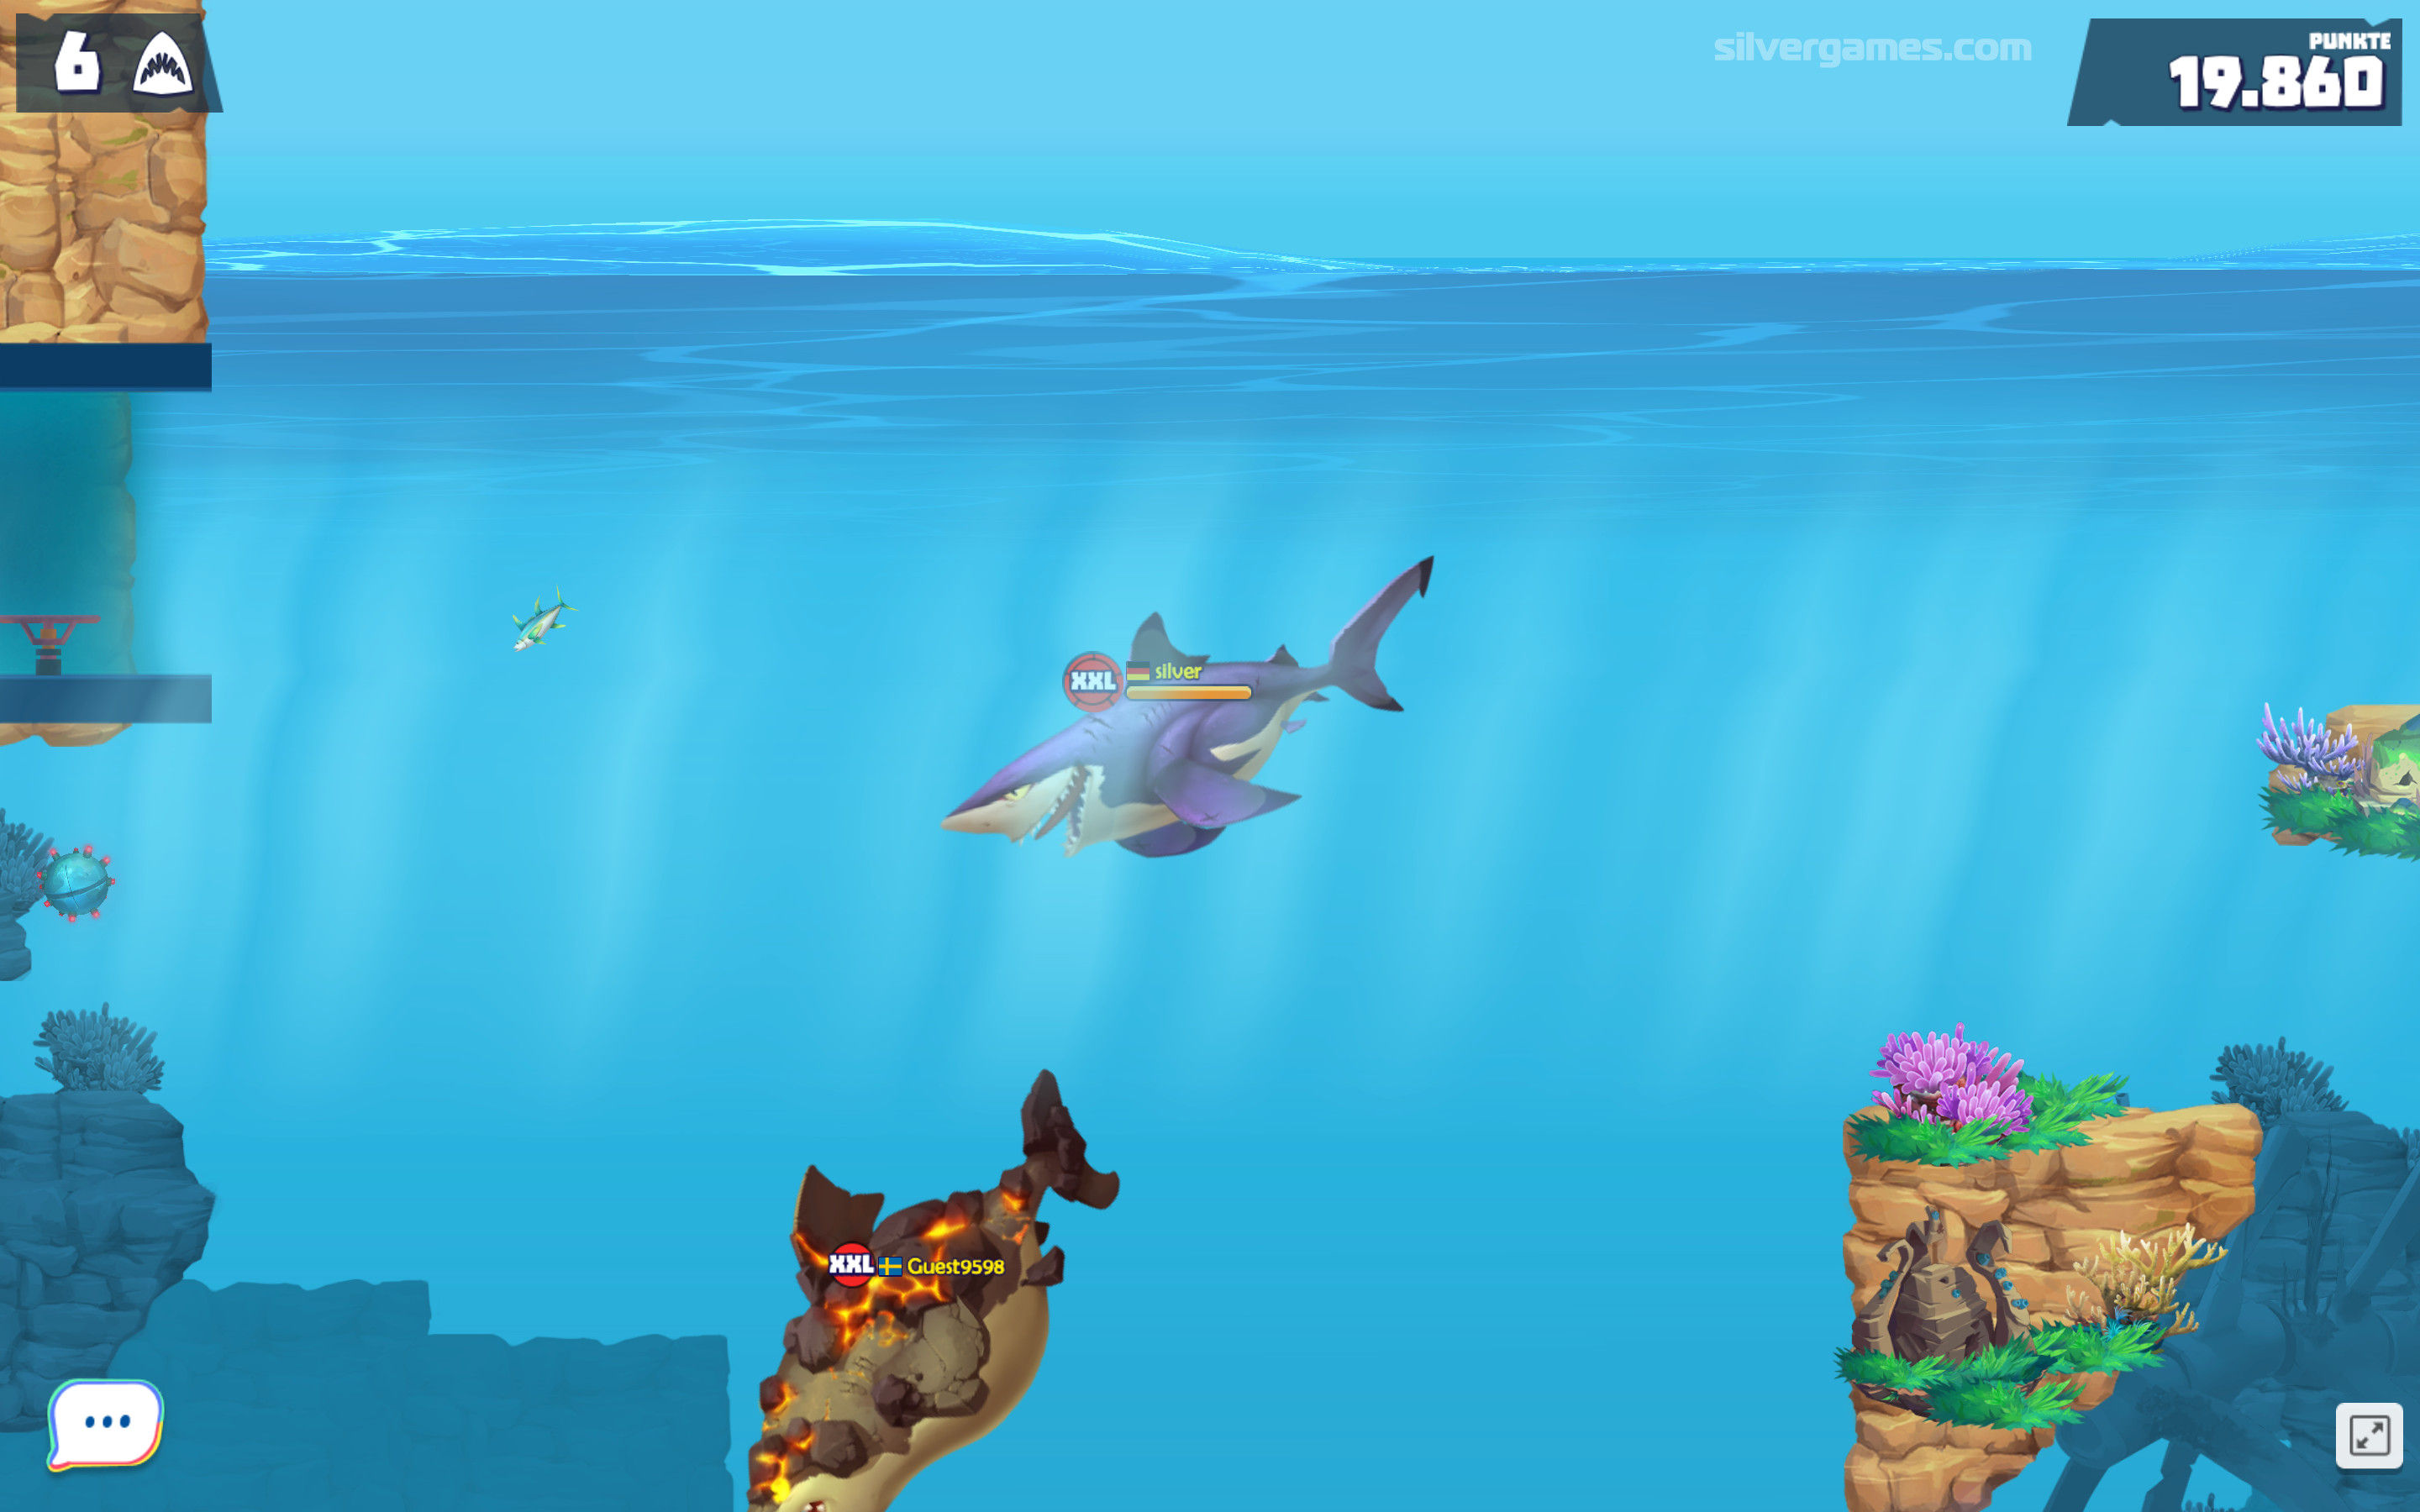 Hungry Shark Arena 🕹️ Two Player Games